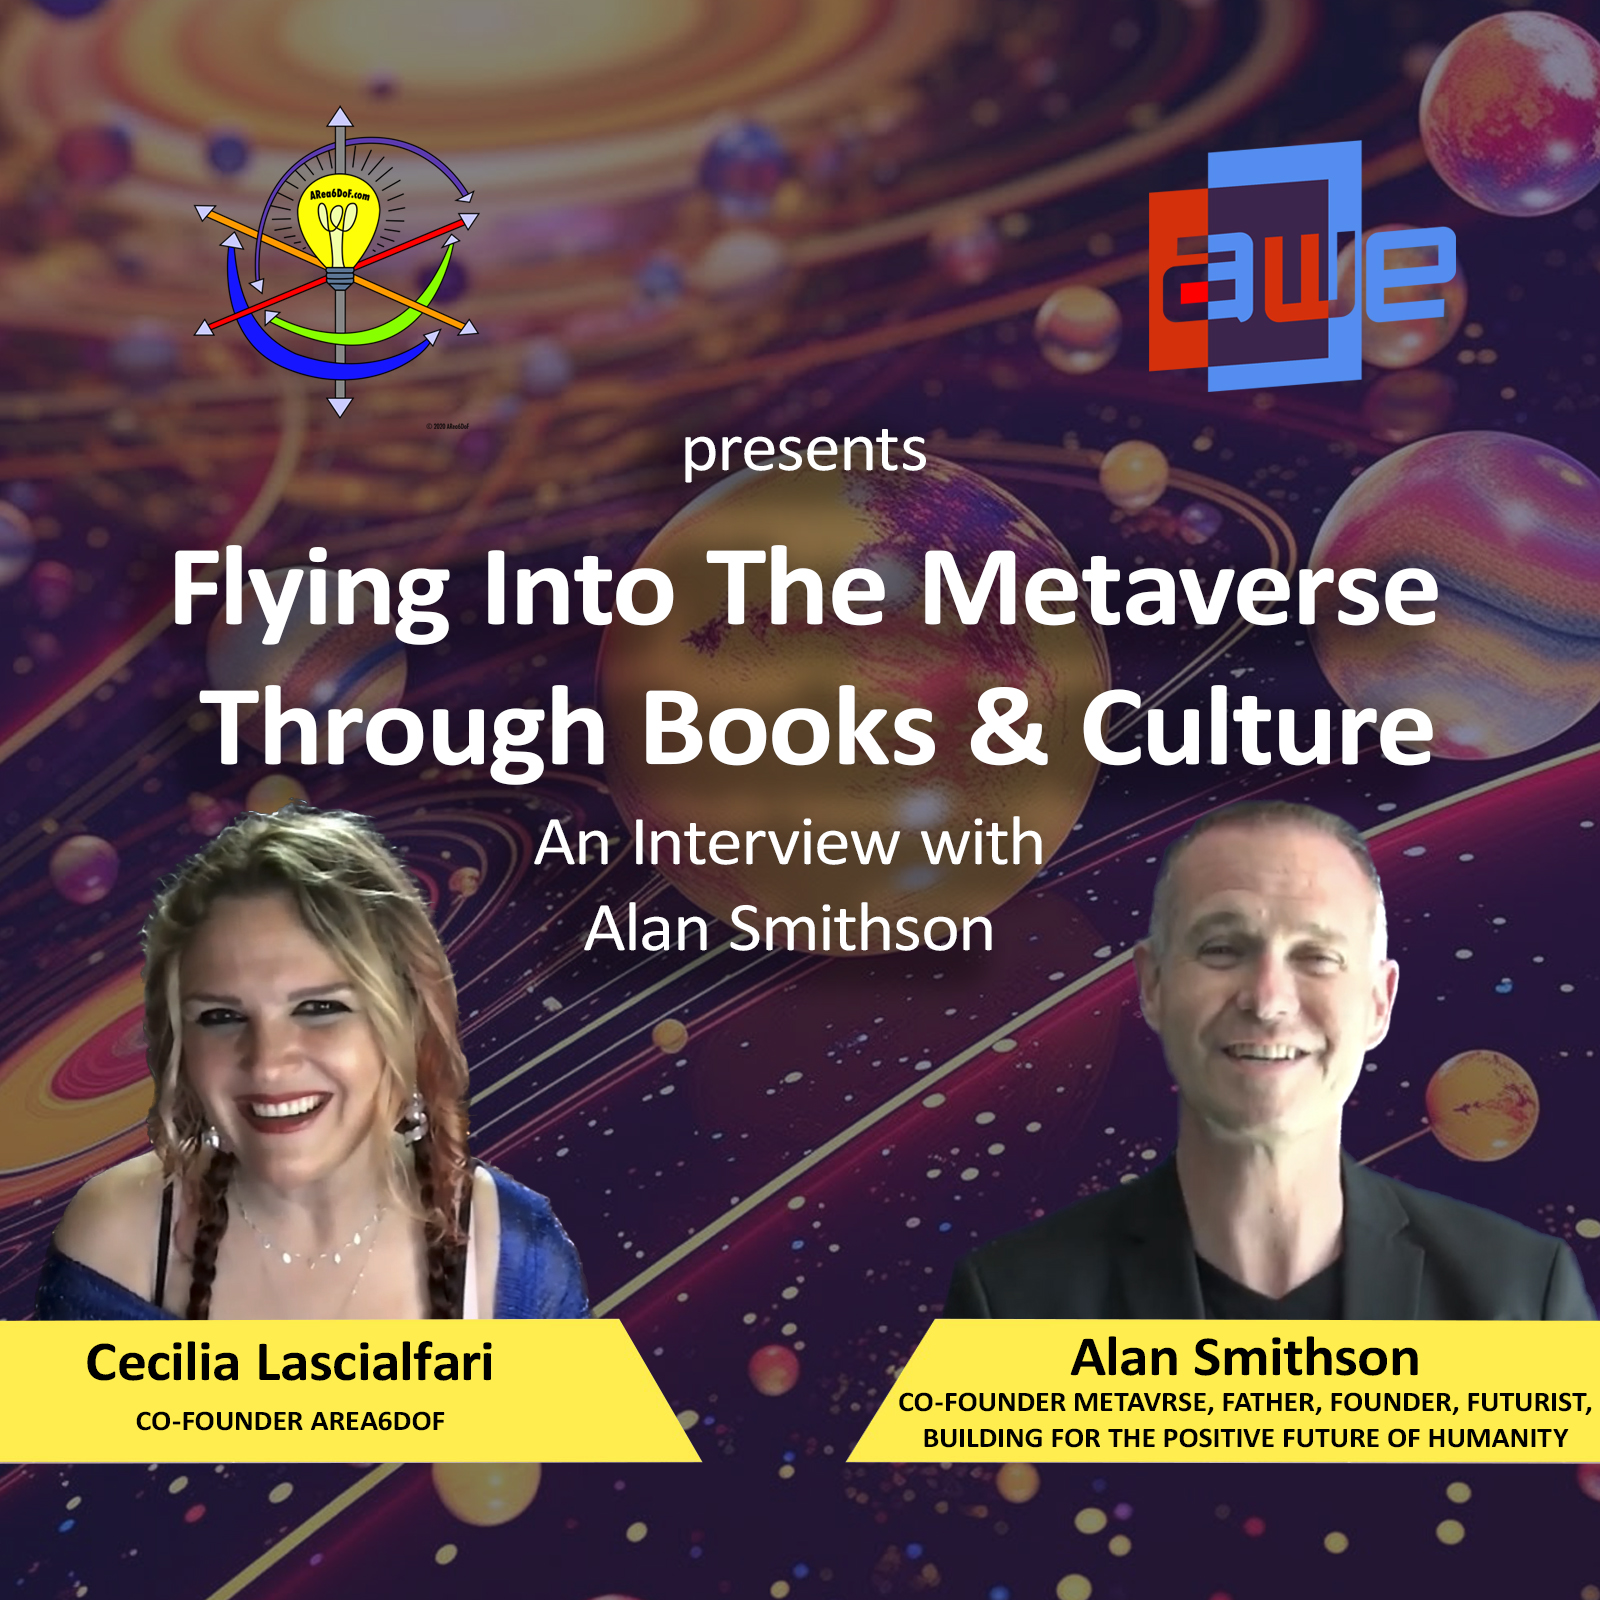 ALAN SMITHSON at “Flying into the Metaverse Through Books and Culture” – METAVRSE